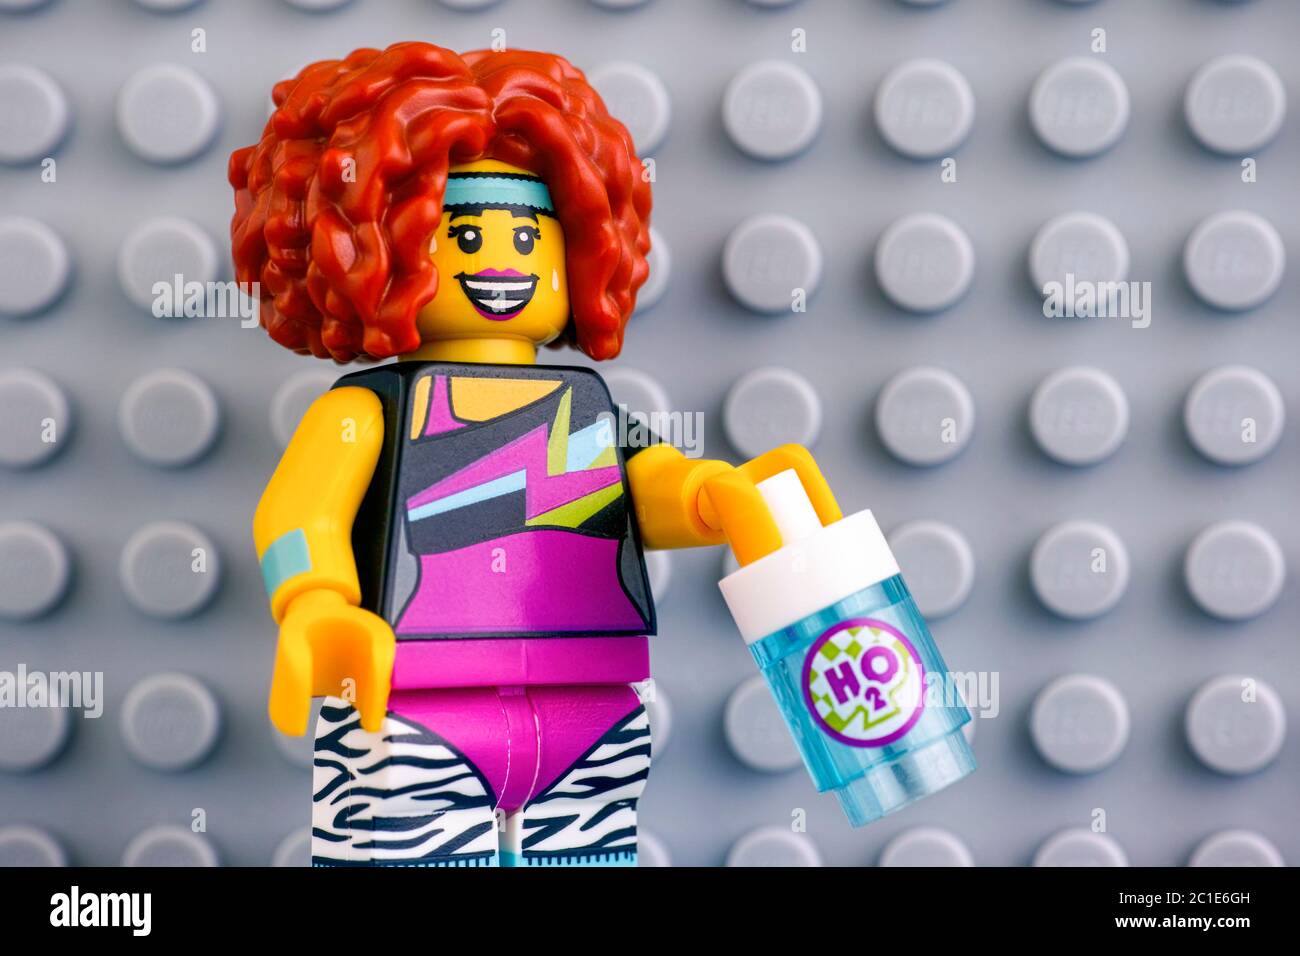 Tambov, Russian Federation - June 04, 2020 Portrait of Lego Dance Instructor minifigure with water bottle against gray baseplate background. Studio sh Stock Photo